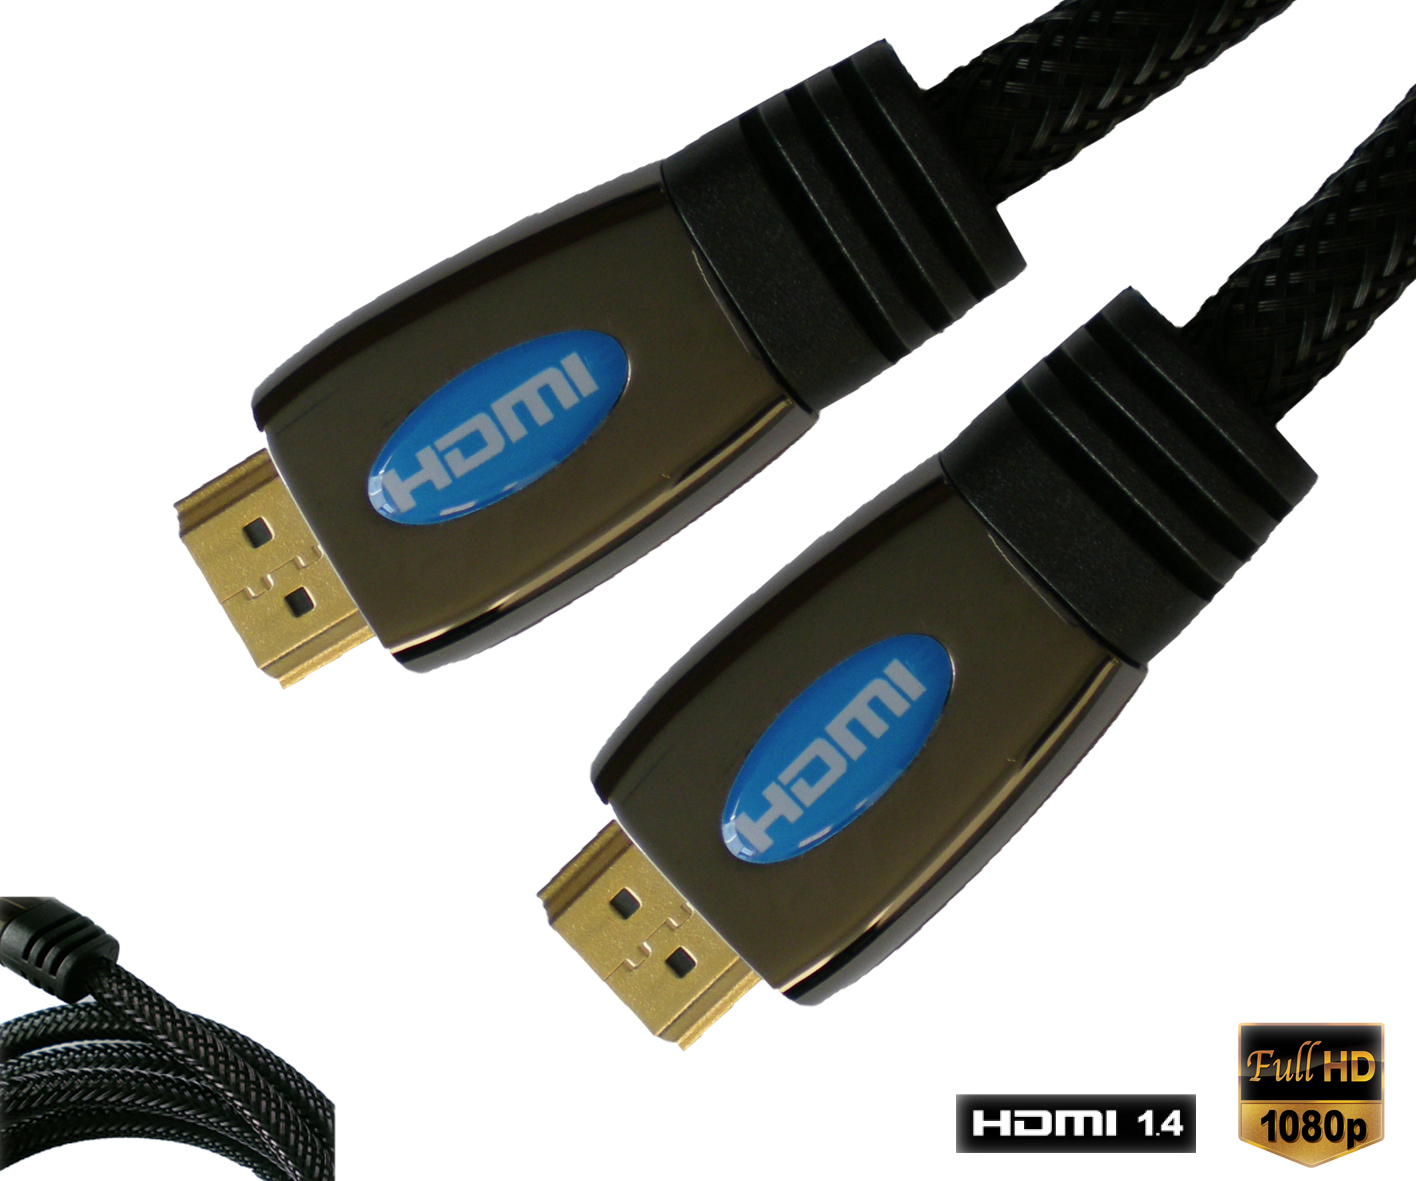 Today's Best Deal - High-quality 1.4 HDMI kabel